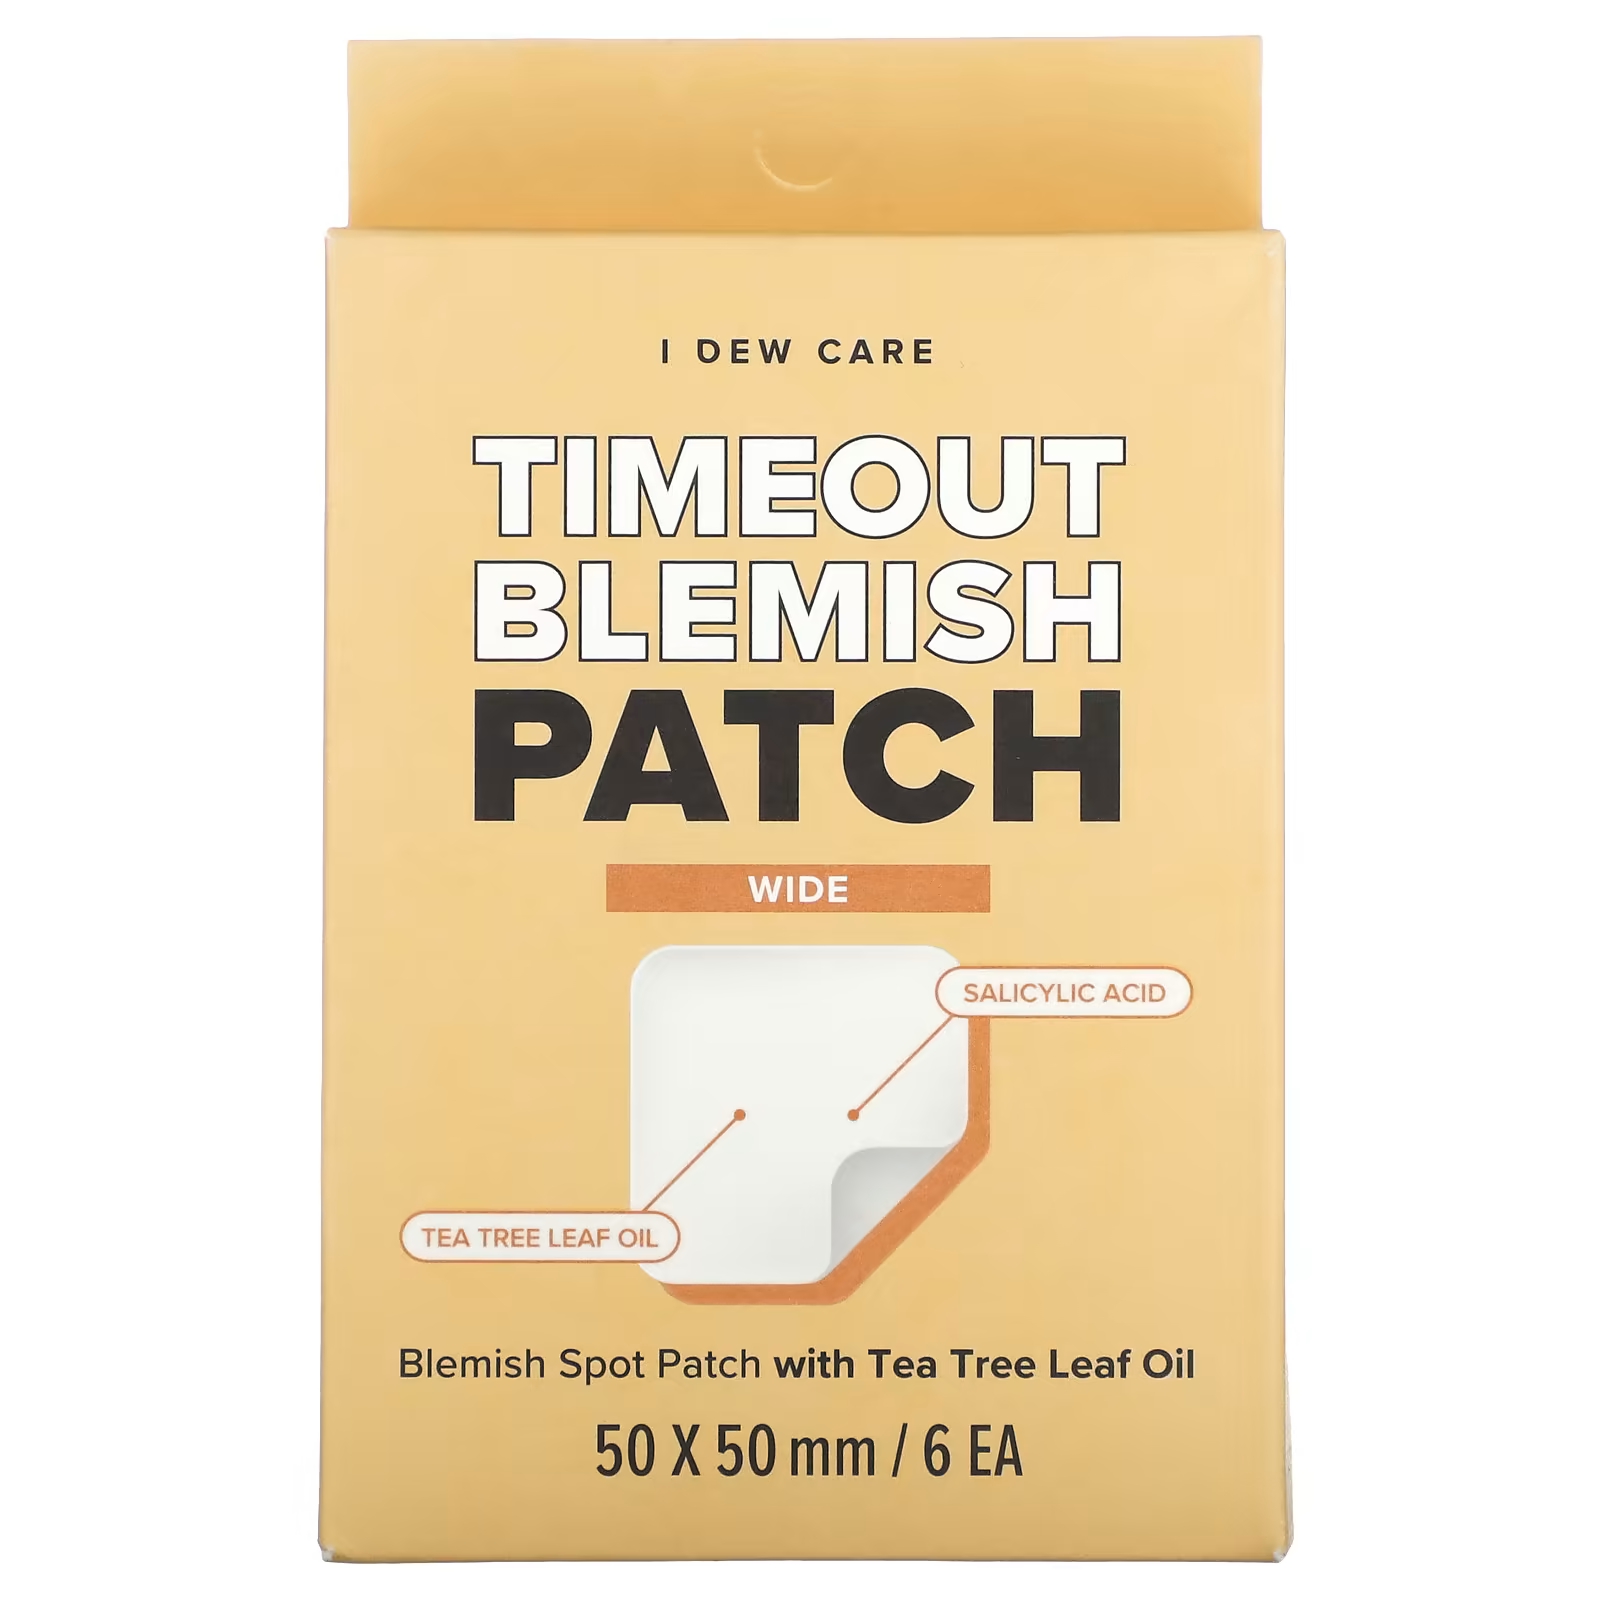 Патчи от пятен I Dew Care Timeout Blemish Patch Wide, 6 патчей патчи от пятен i dew care timeout blemish patch dark spot 32 патча